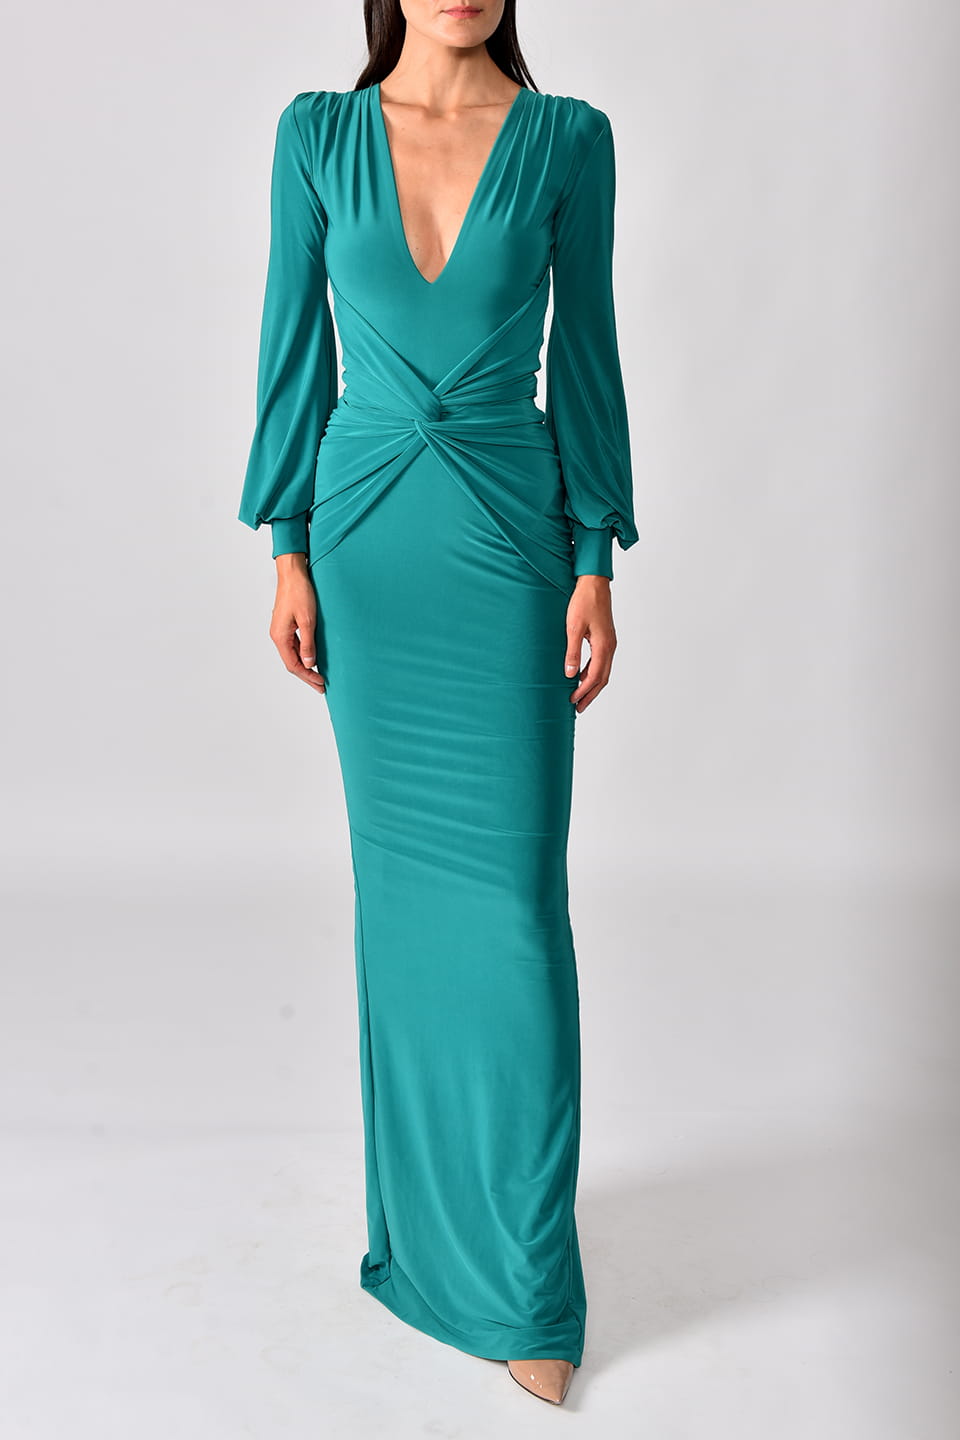 Thumbnail for Product gallery 1, Model wearing emerald green dress with long sleeves from Hamel fashion stylist, posing for front view